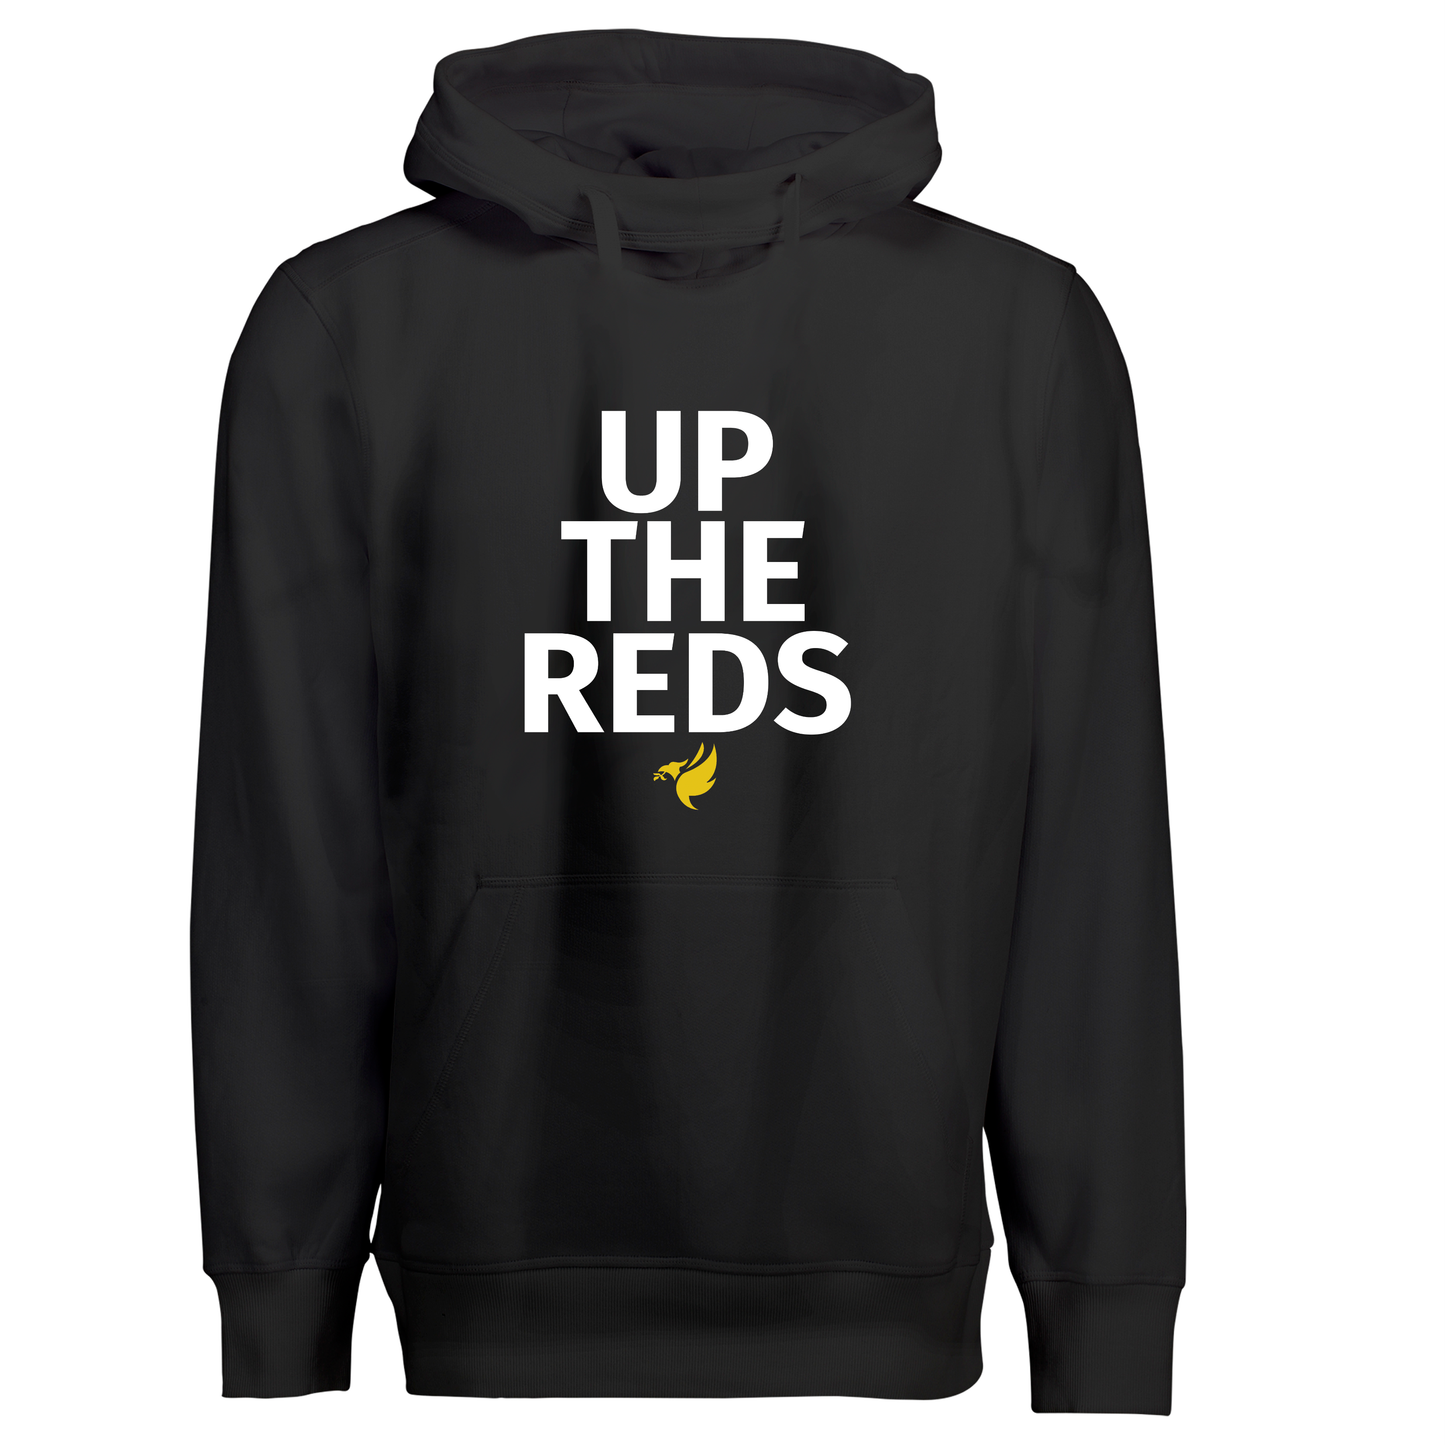 Up The Reds - Hoodie